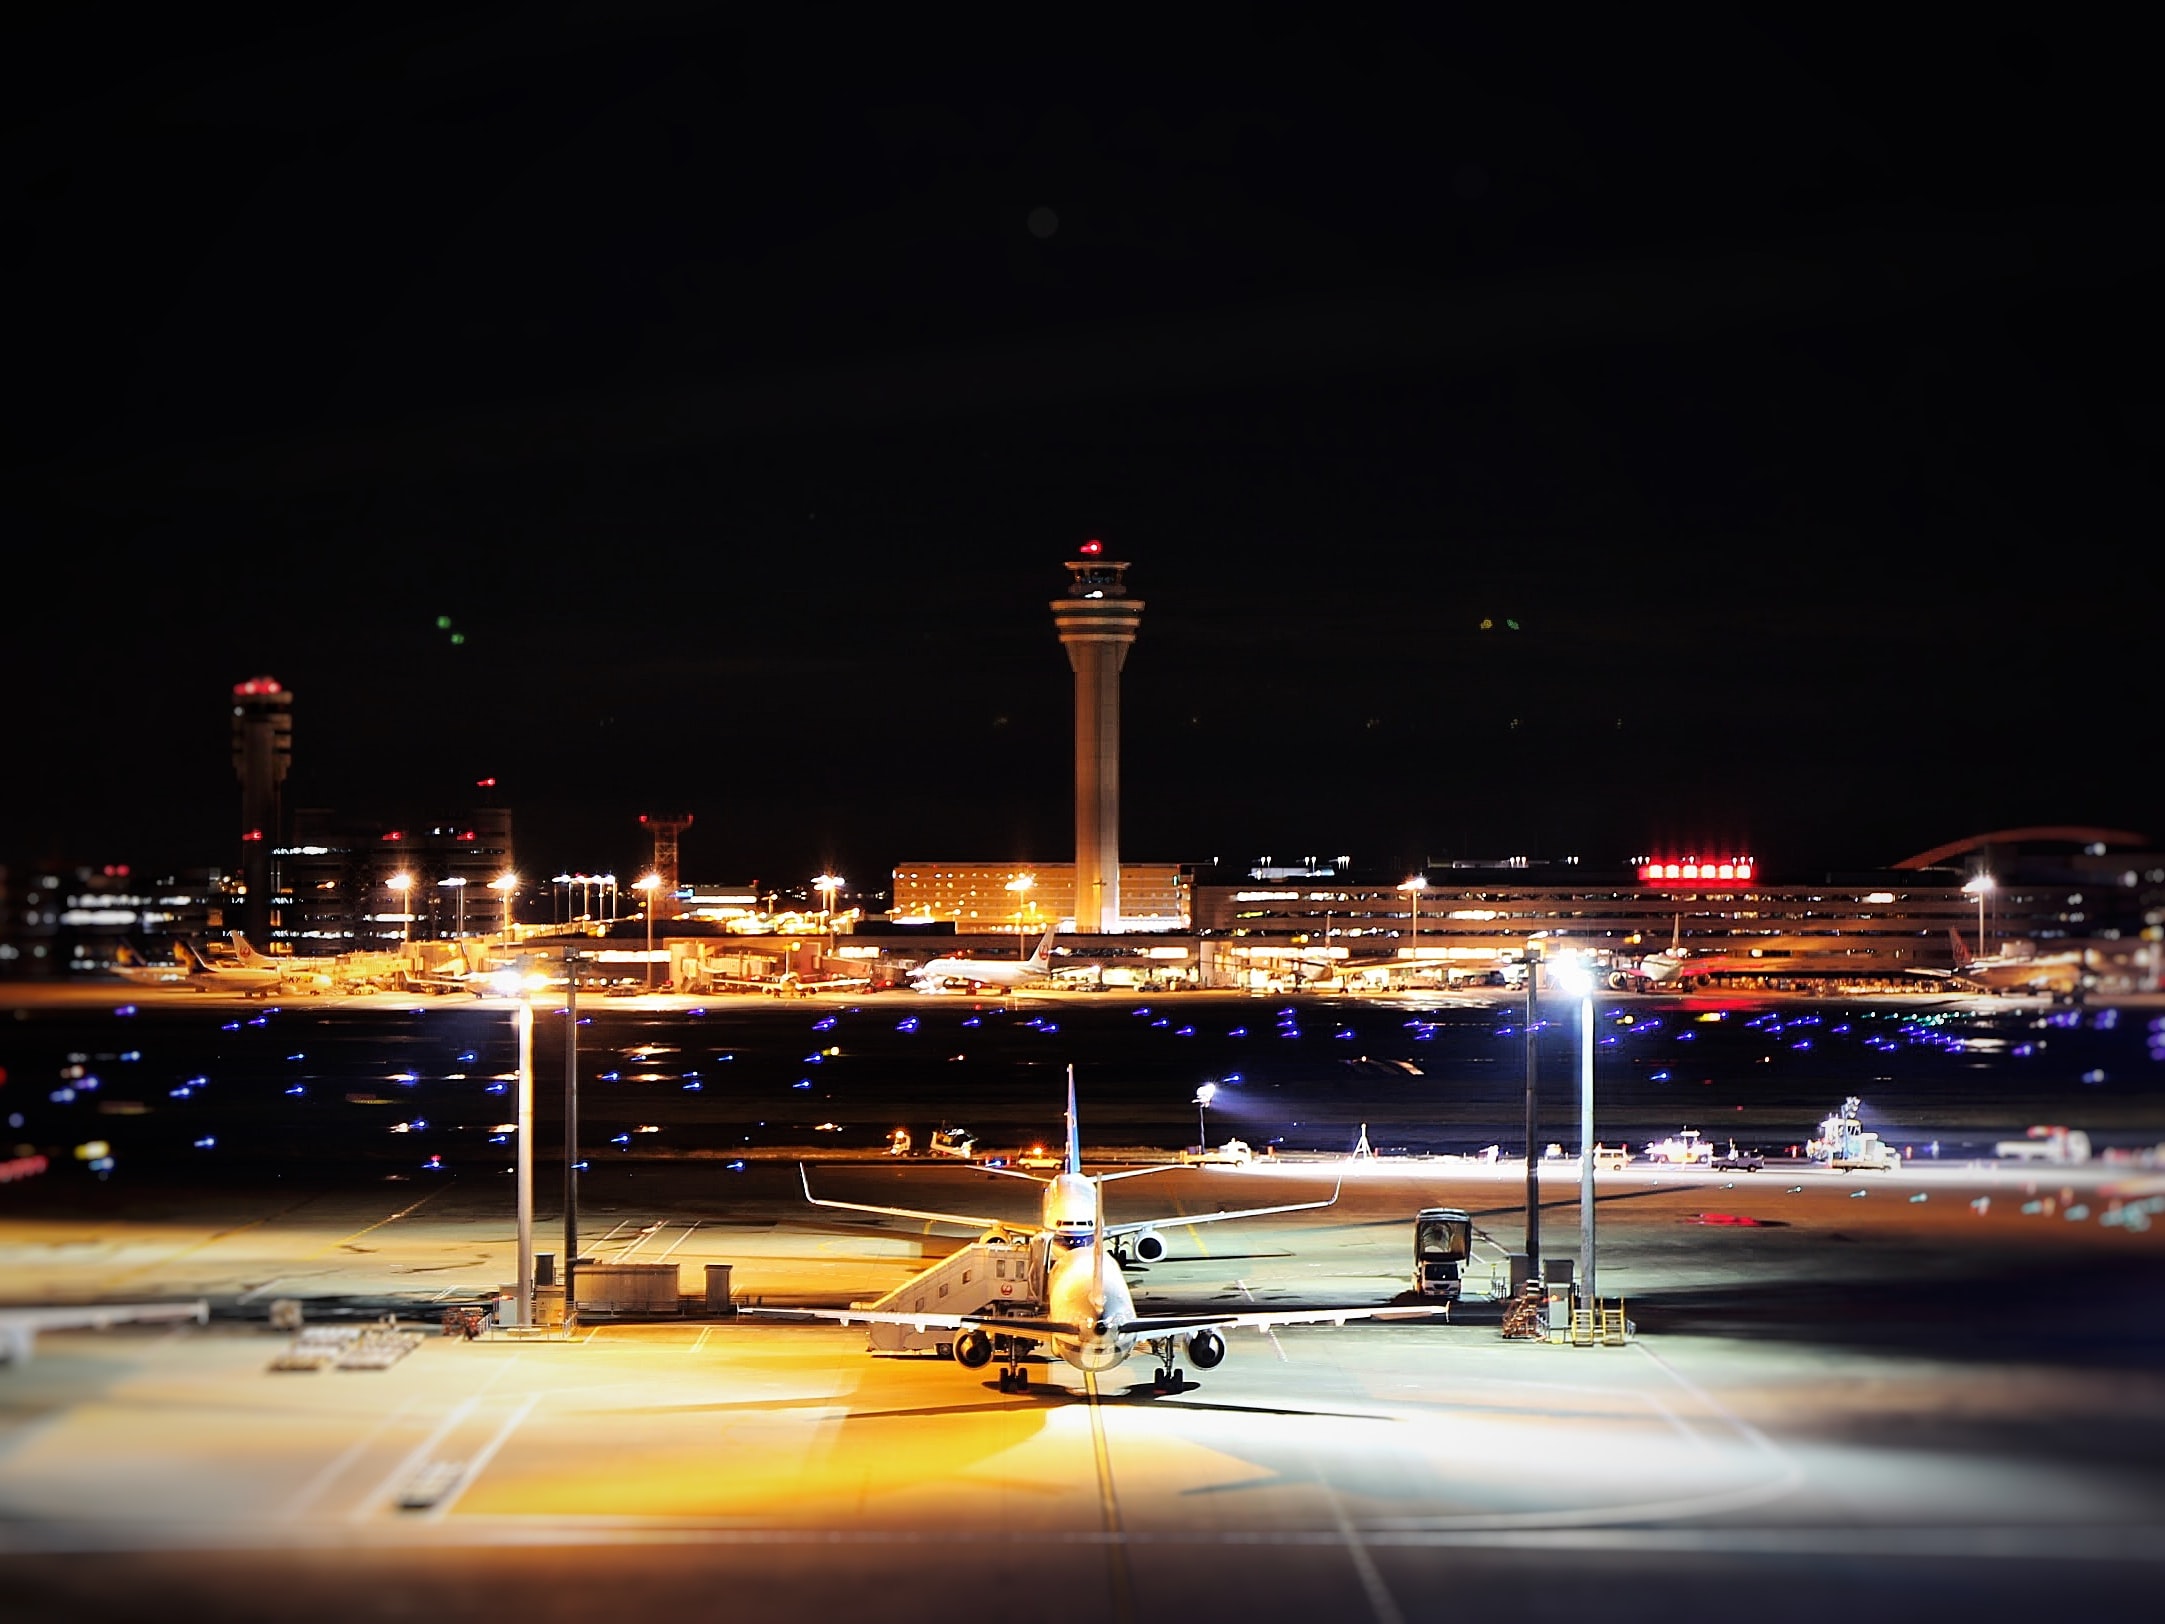 Future proof airport lighting, security and sustainability